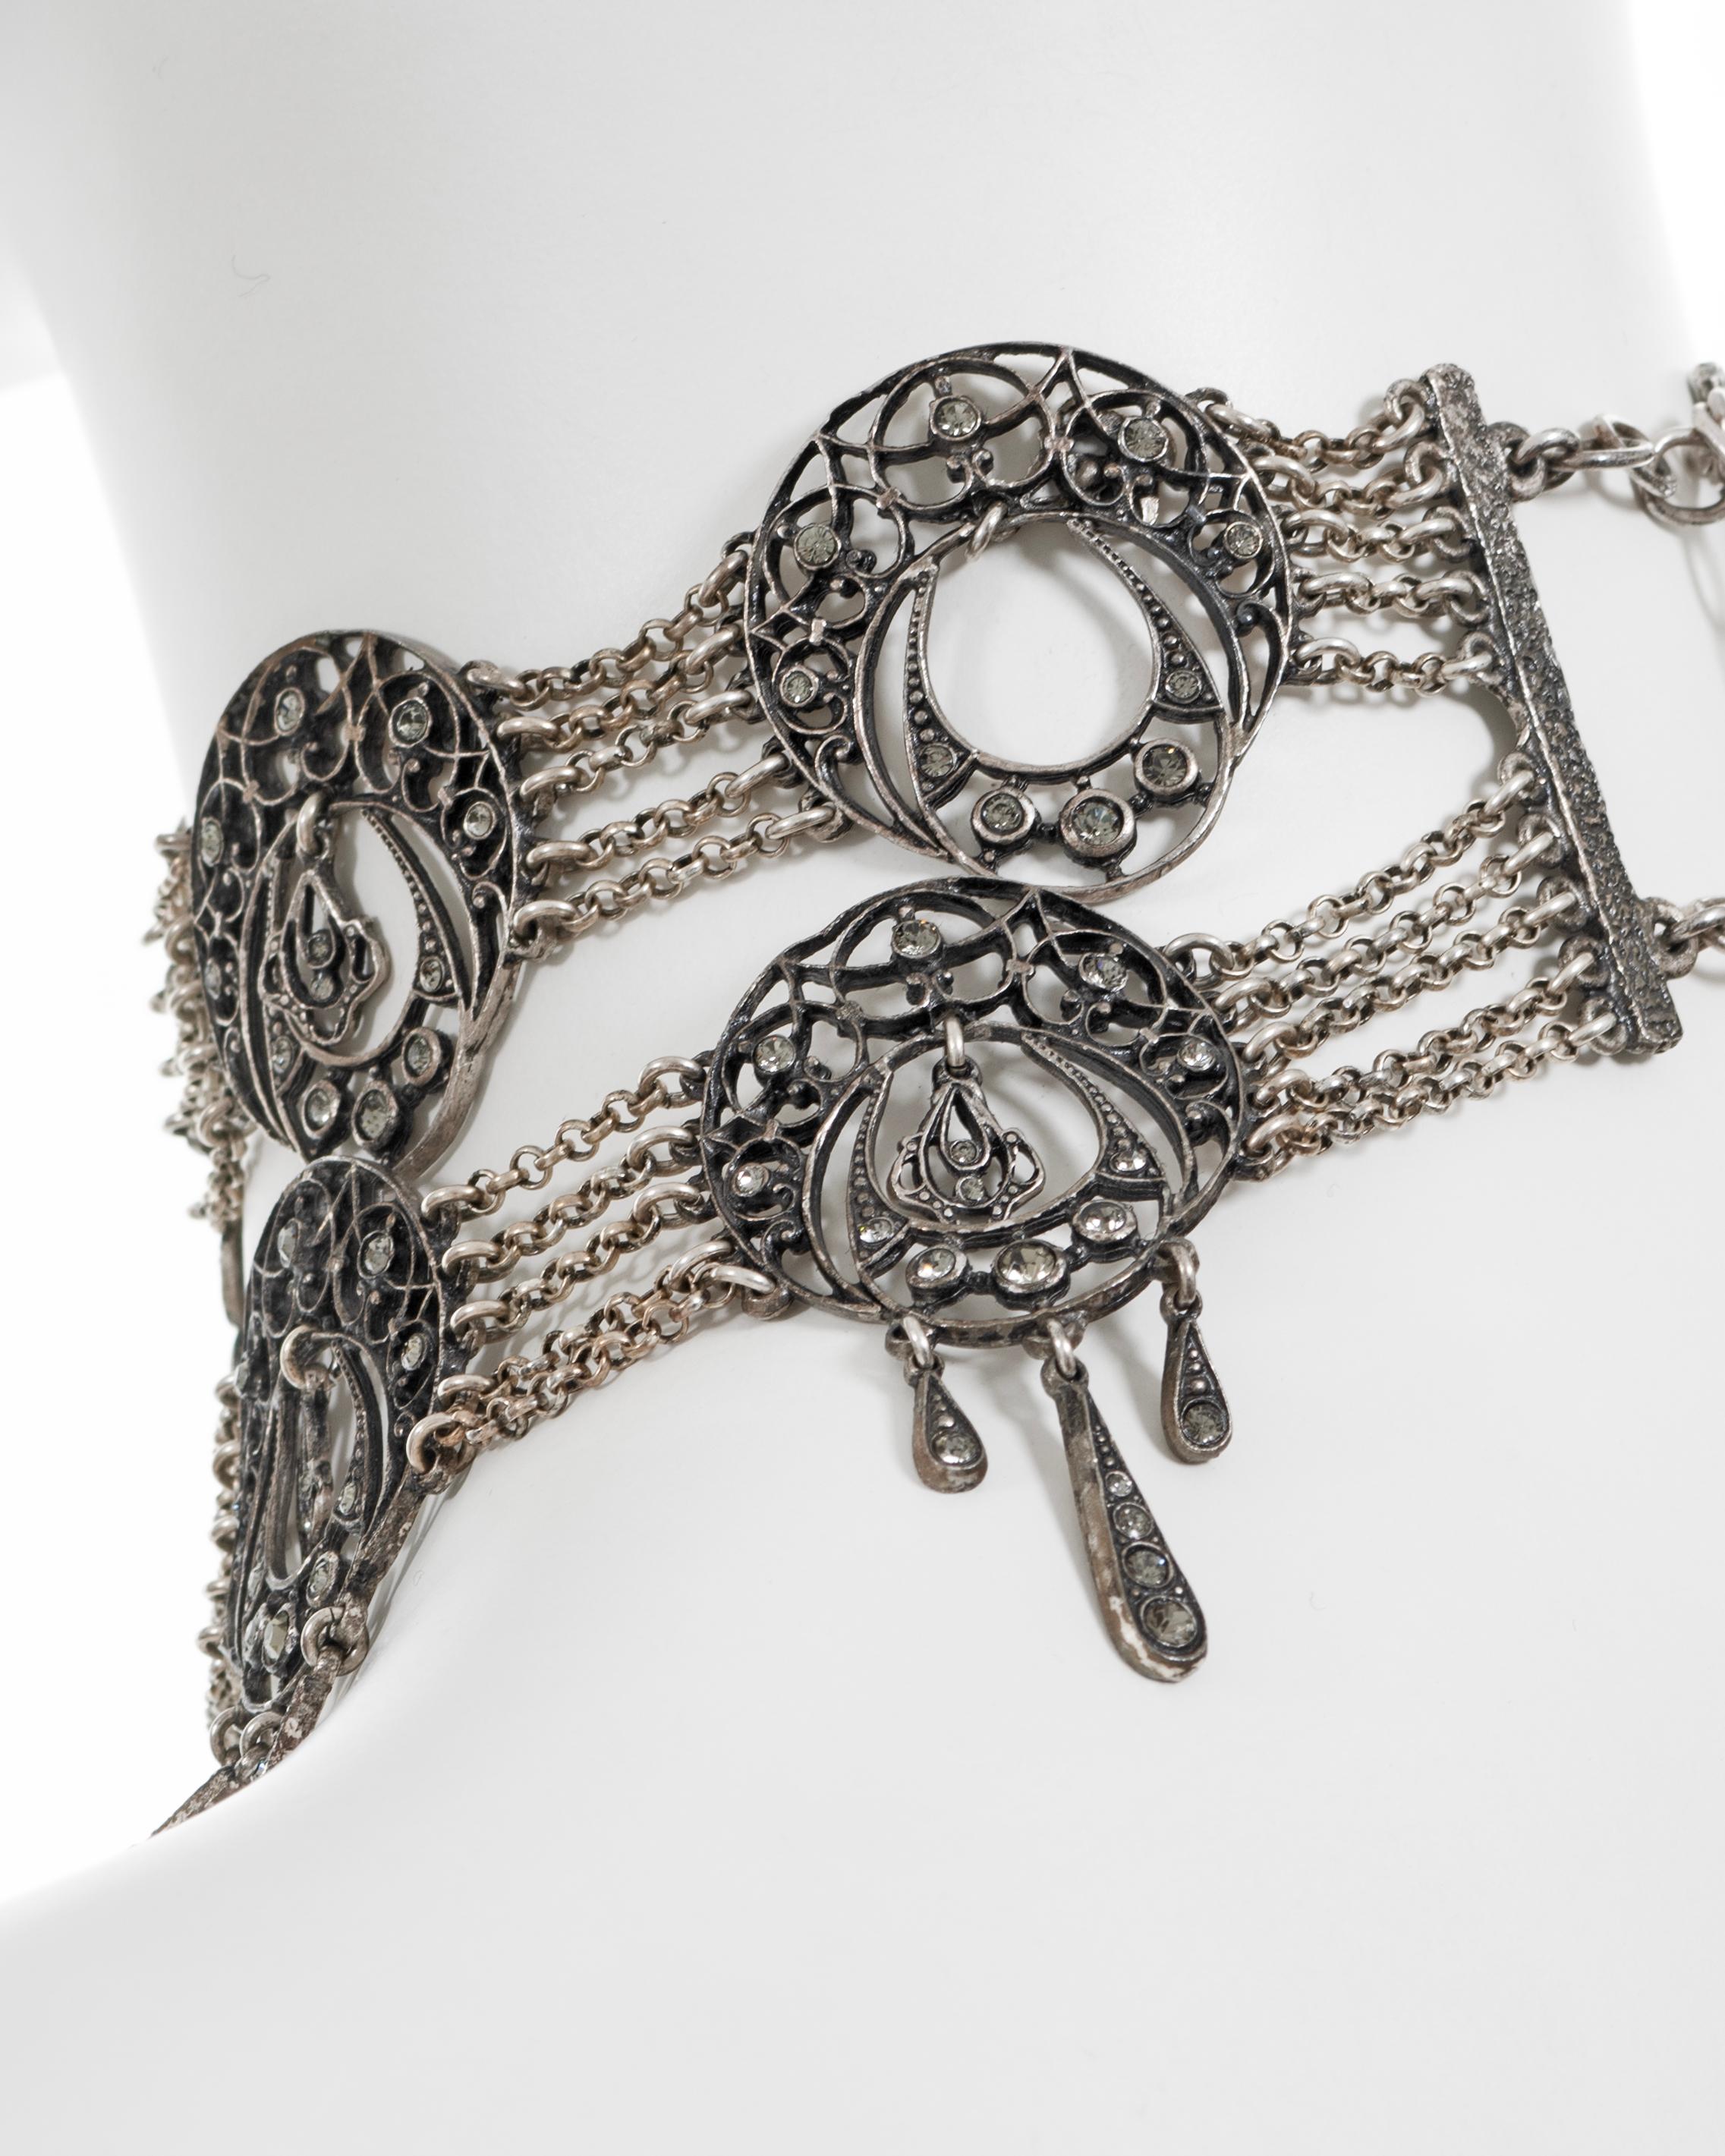 Christian Dior by John Galliano antique-style filigree choker necklace, ss 1999 For Sale 3